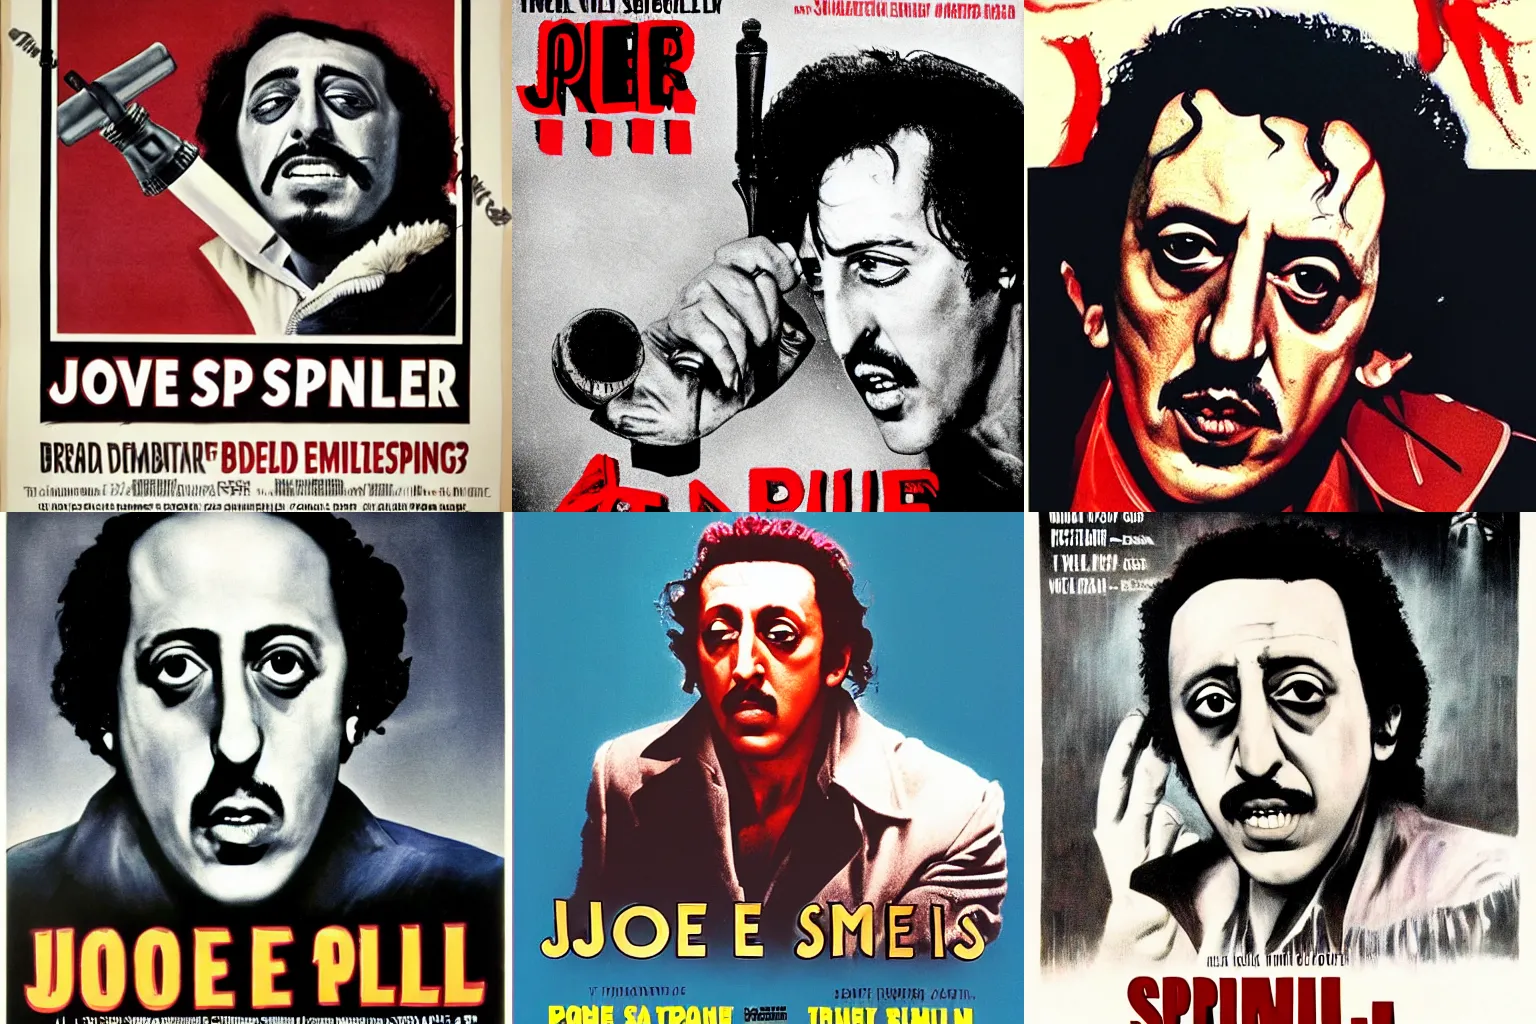 Prompt: Movie Poster of Joe Spinell